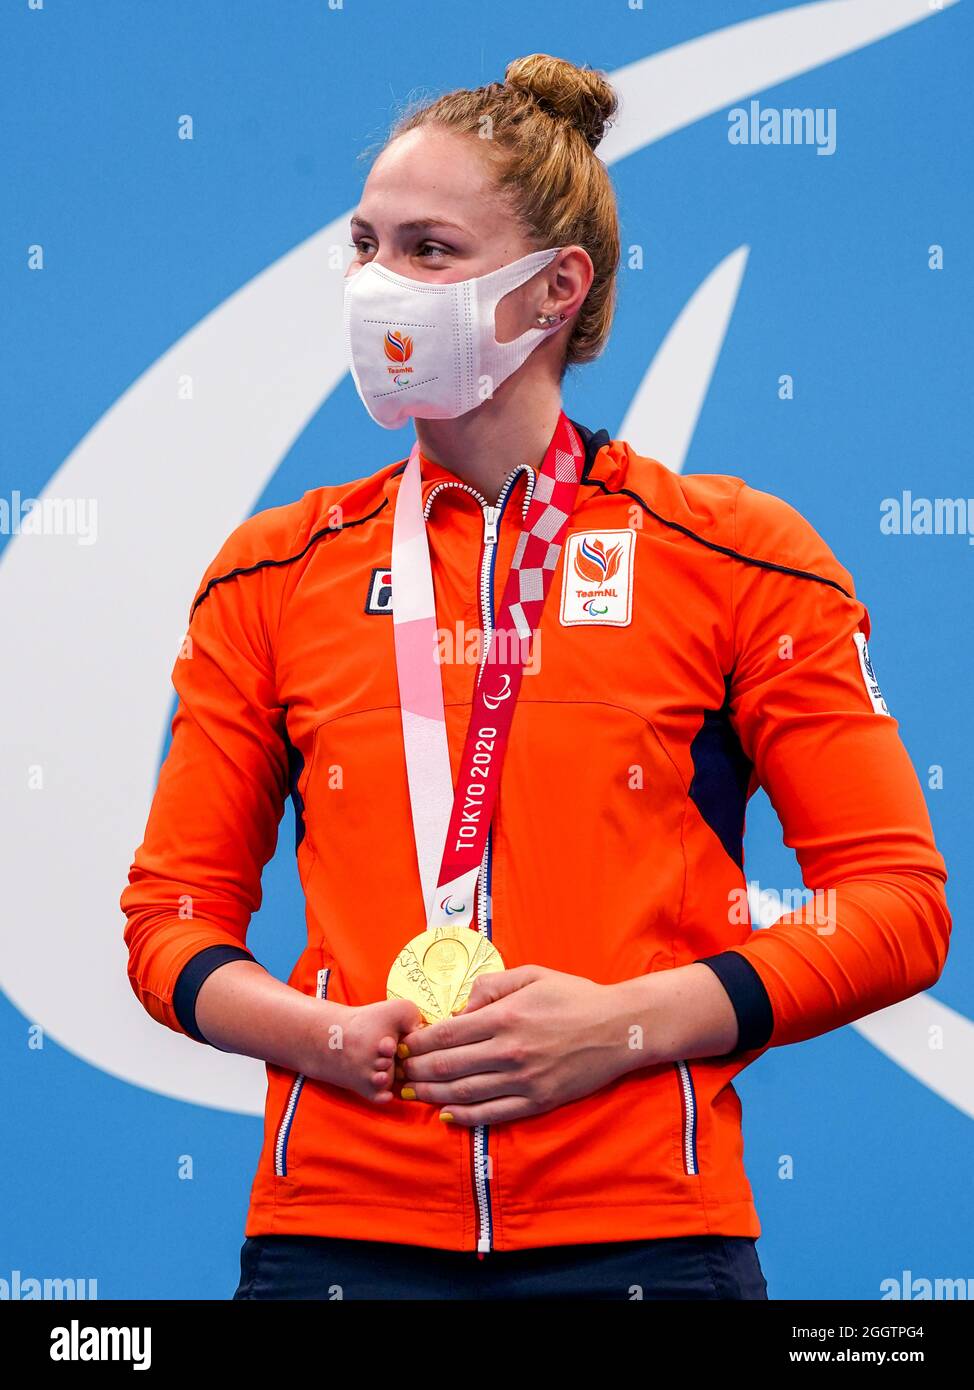 TOKYO, JAPAN - SEPTEMBER 3: Chantalle Zijderveld of the Netherlands winner of the gold medal competing on Women's 200m Individual Medley - SM10 during the Tokyo 2020 Paralympic Games at Tokyo Aquatics Centre on September 3, 2021 in Tokyo, Japan (Photo by Ilse Schaffers/Orange Pictures) NOCNSF Stock Photo